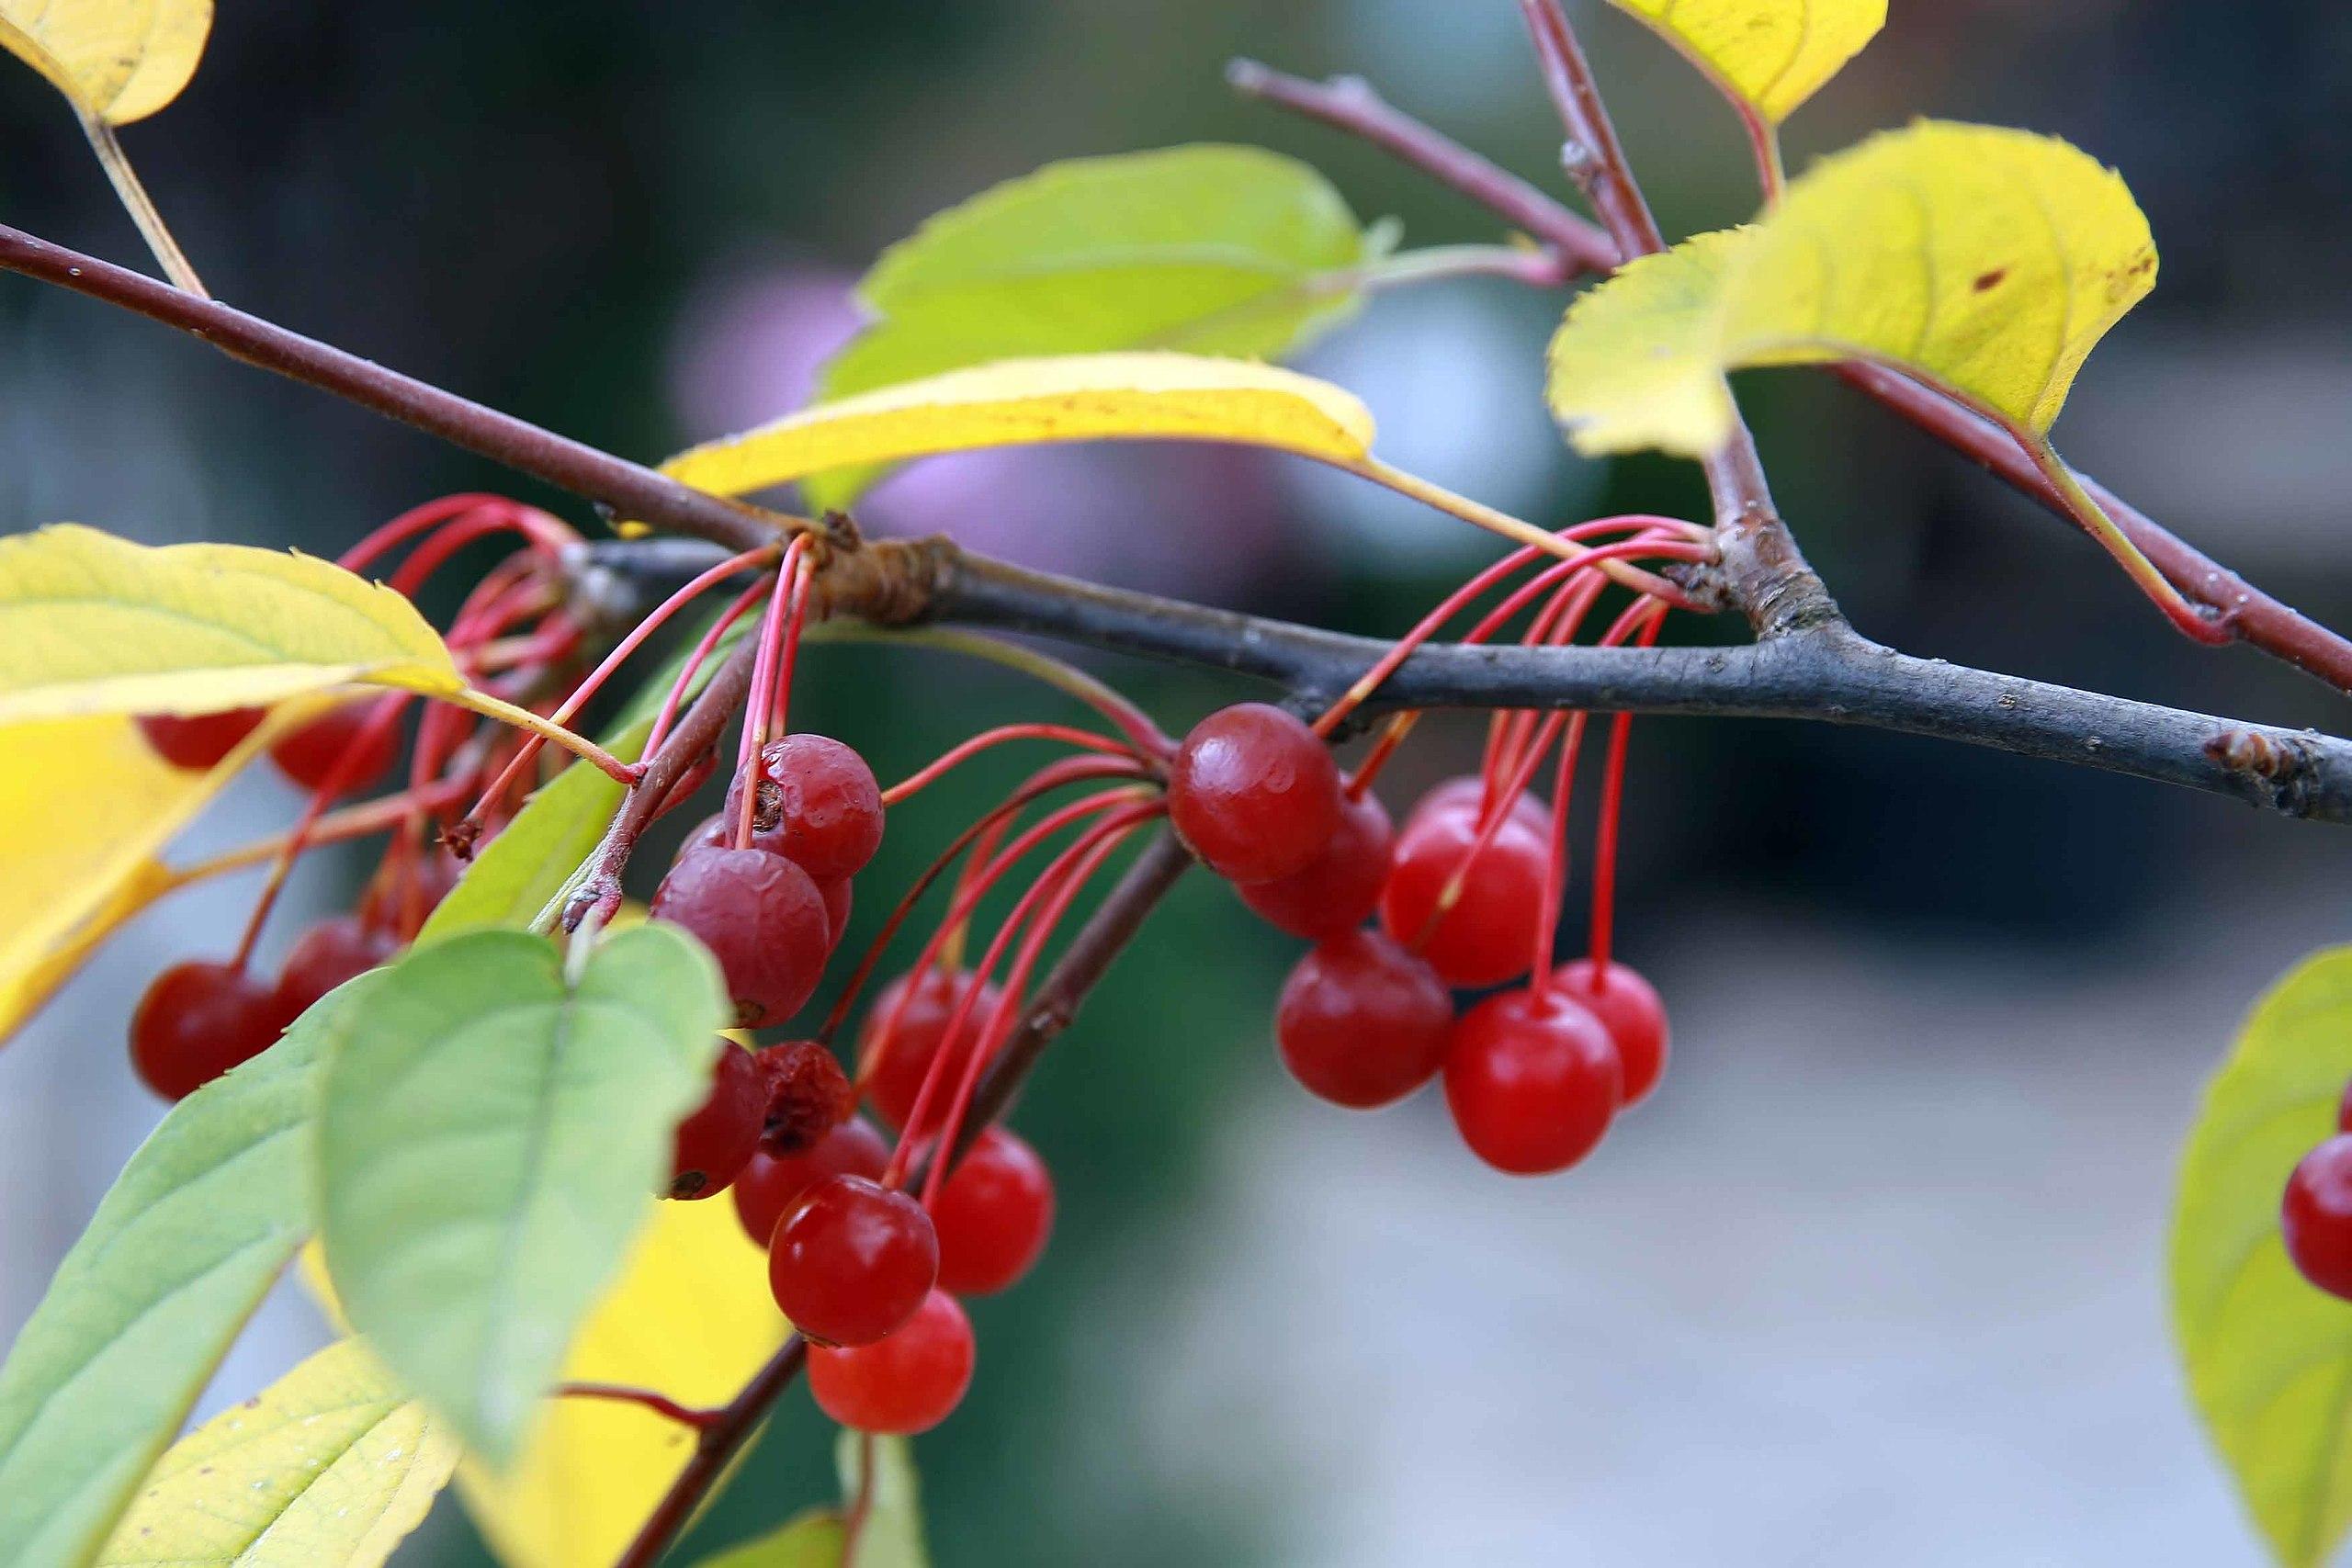 Red fruits with stems, lime leaves and petiole, and dark-brown branches